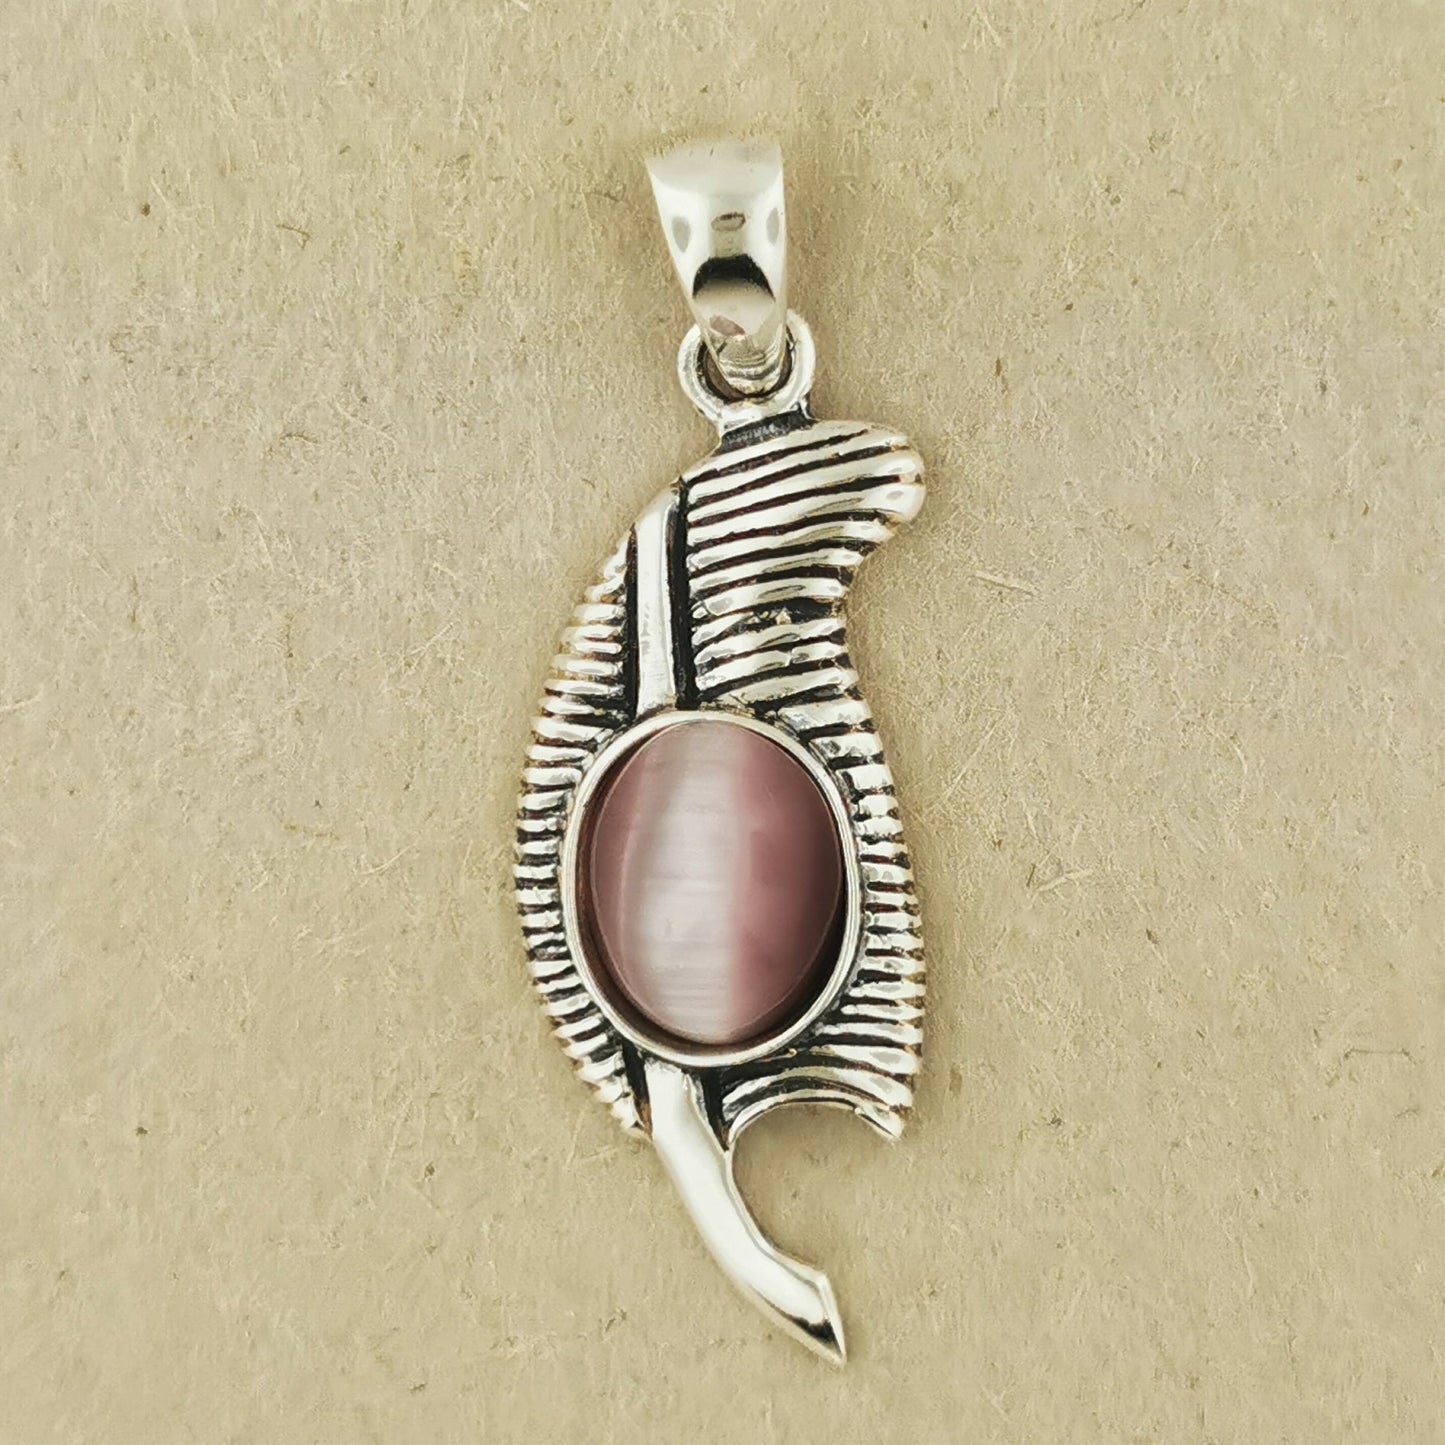 Feather of Ma'at Pendant in Sterling Silver with Cat's Eye Glass, Egyptian Feather Pendant, Egyptian Goddess Pendant, Goddess of Truth Pendant, Silver Egyptian Feather Pendant, Silver Ma’at Pendant, Egyptian Silver Pendant, Silver Gemstone Egyptian Feather Pendant